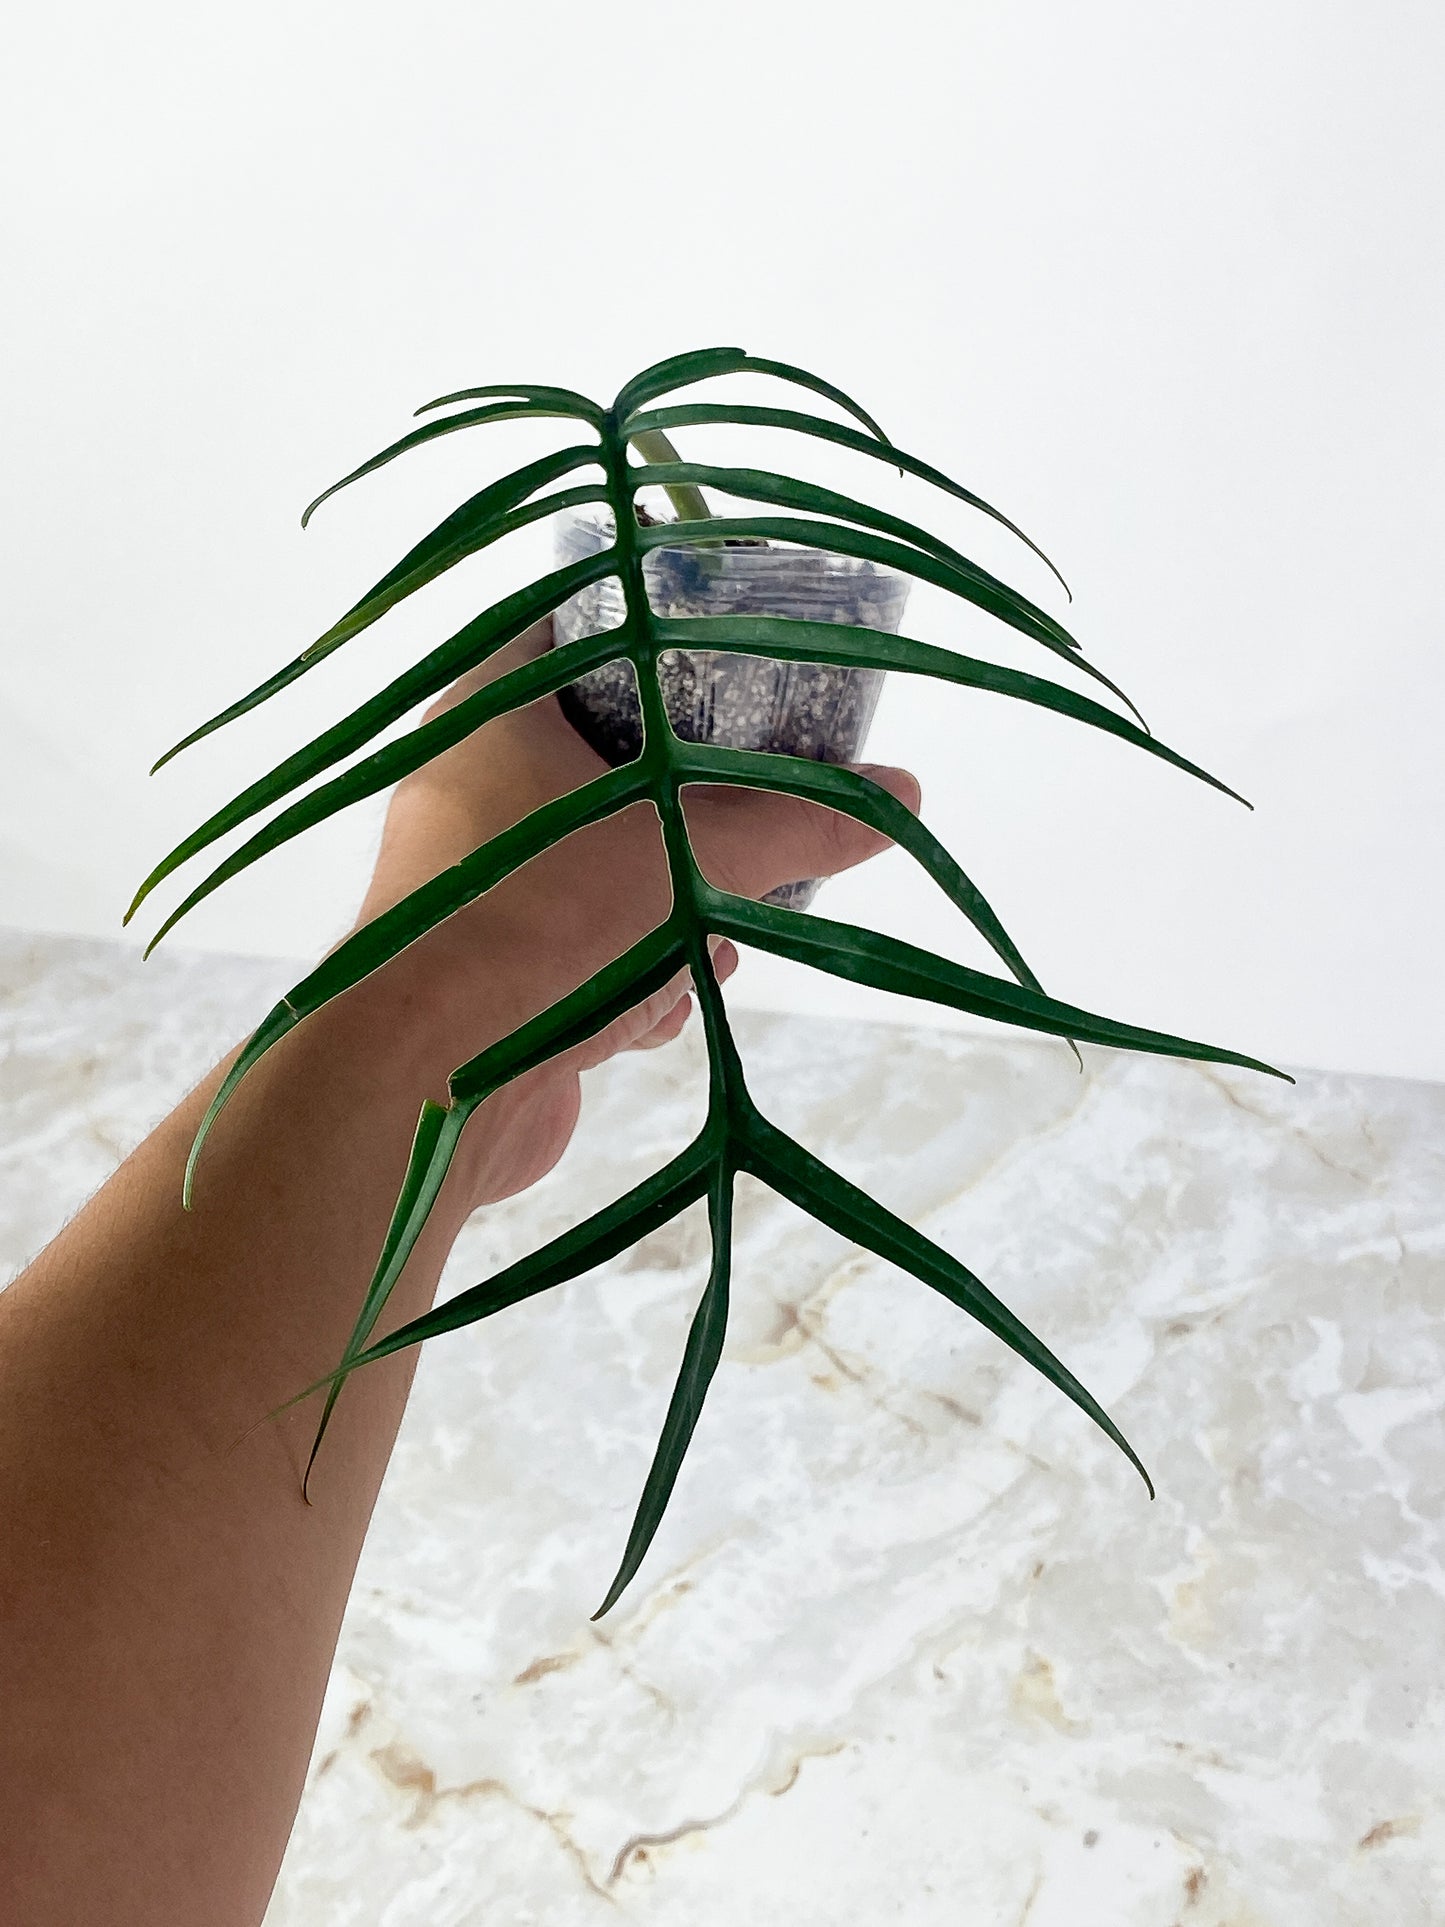 Grower Choice: Philodendron Tortum Narrow Form Rooted cutting